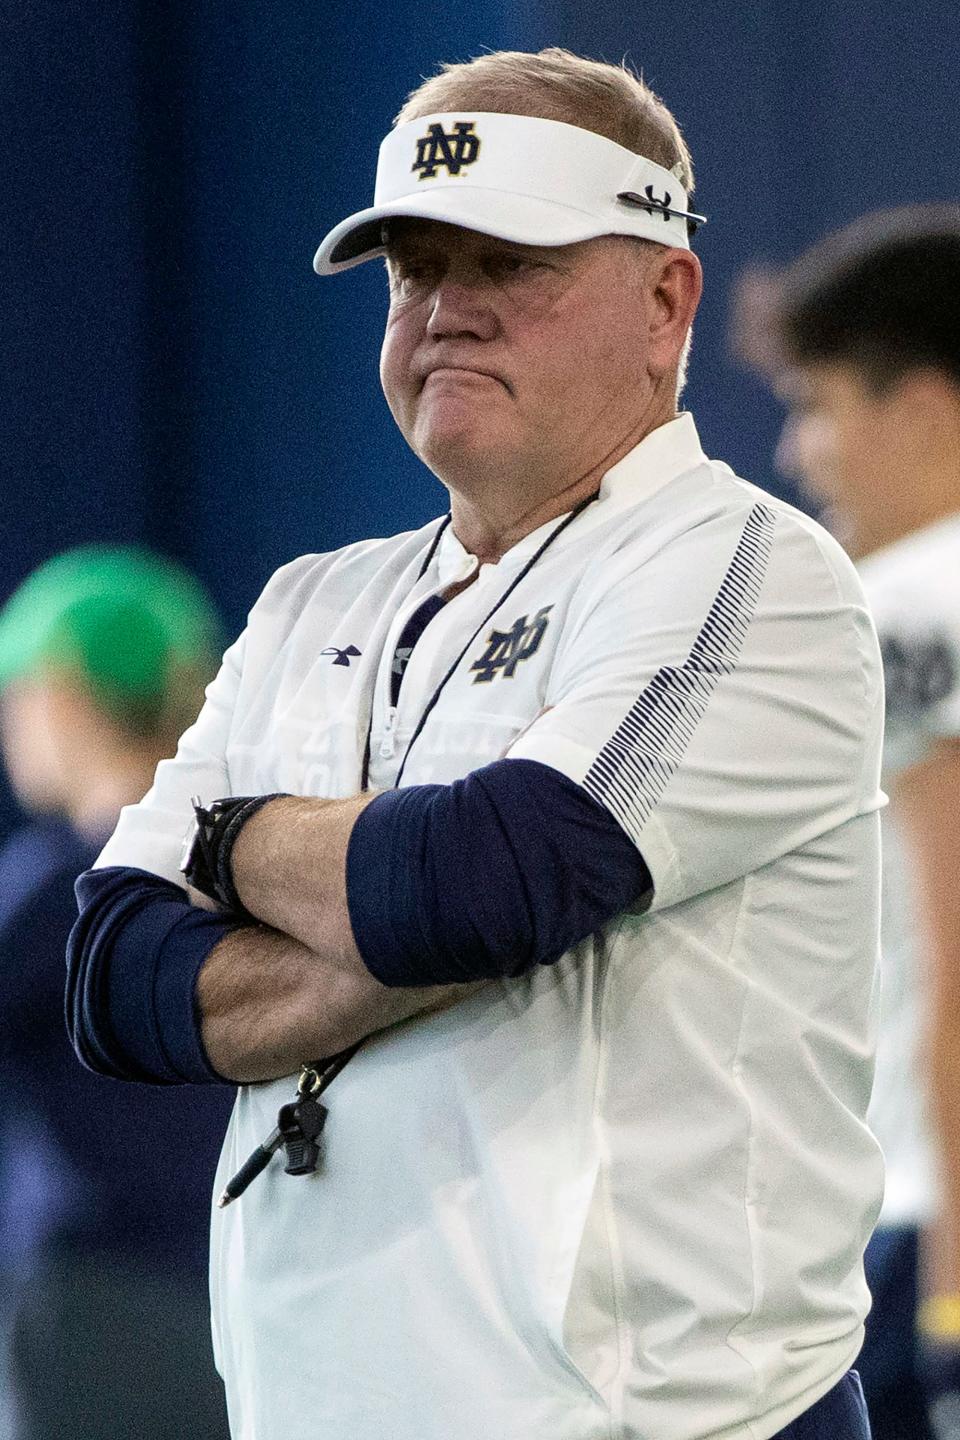 Brian Kelly has bolted Notre Dame for LSU, where he will make at least $95 million over the next 10 years.